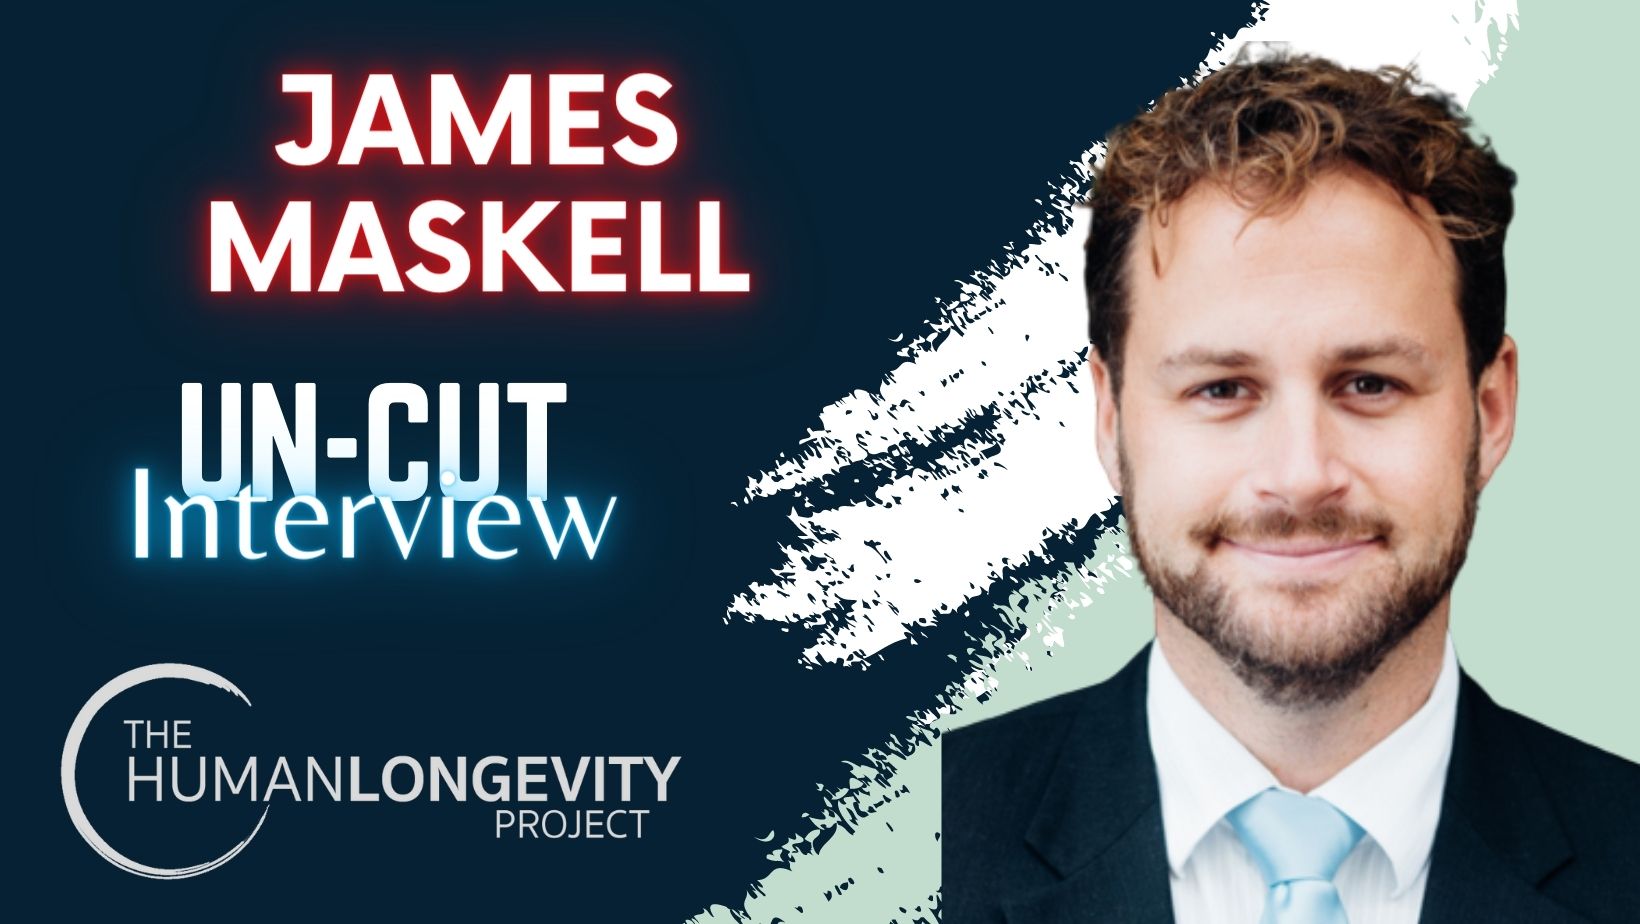 Human Longevity Project Uncut Interview With James Maskell